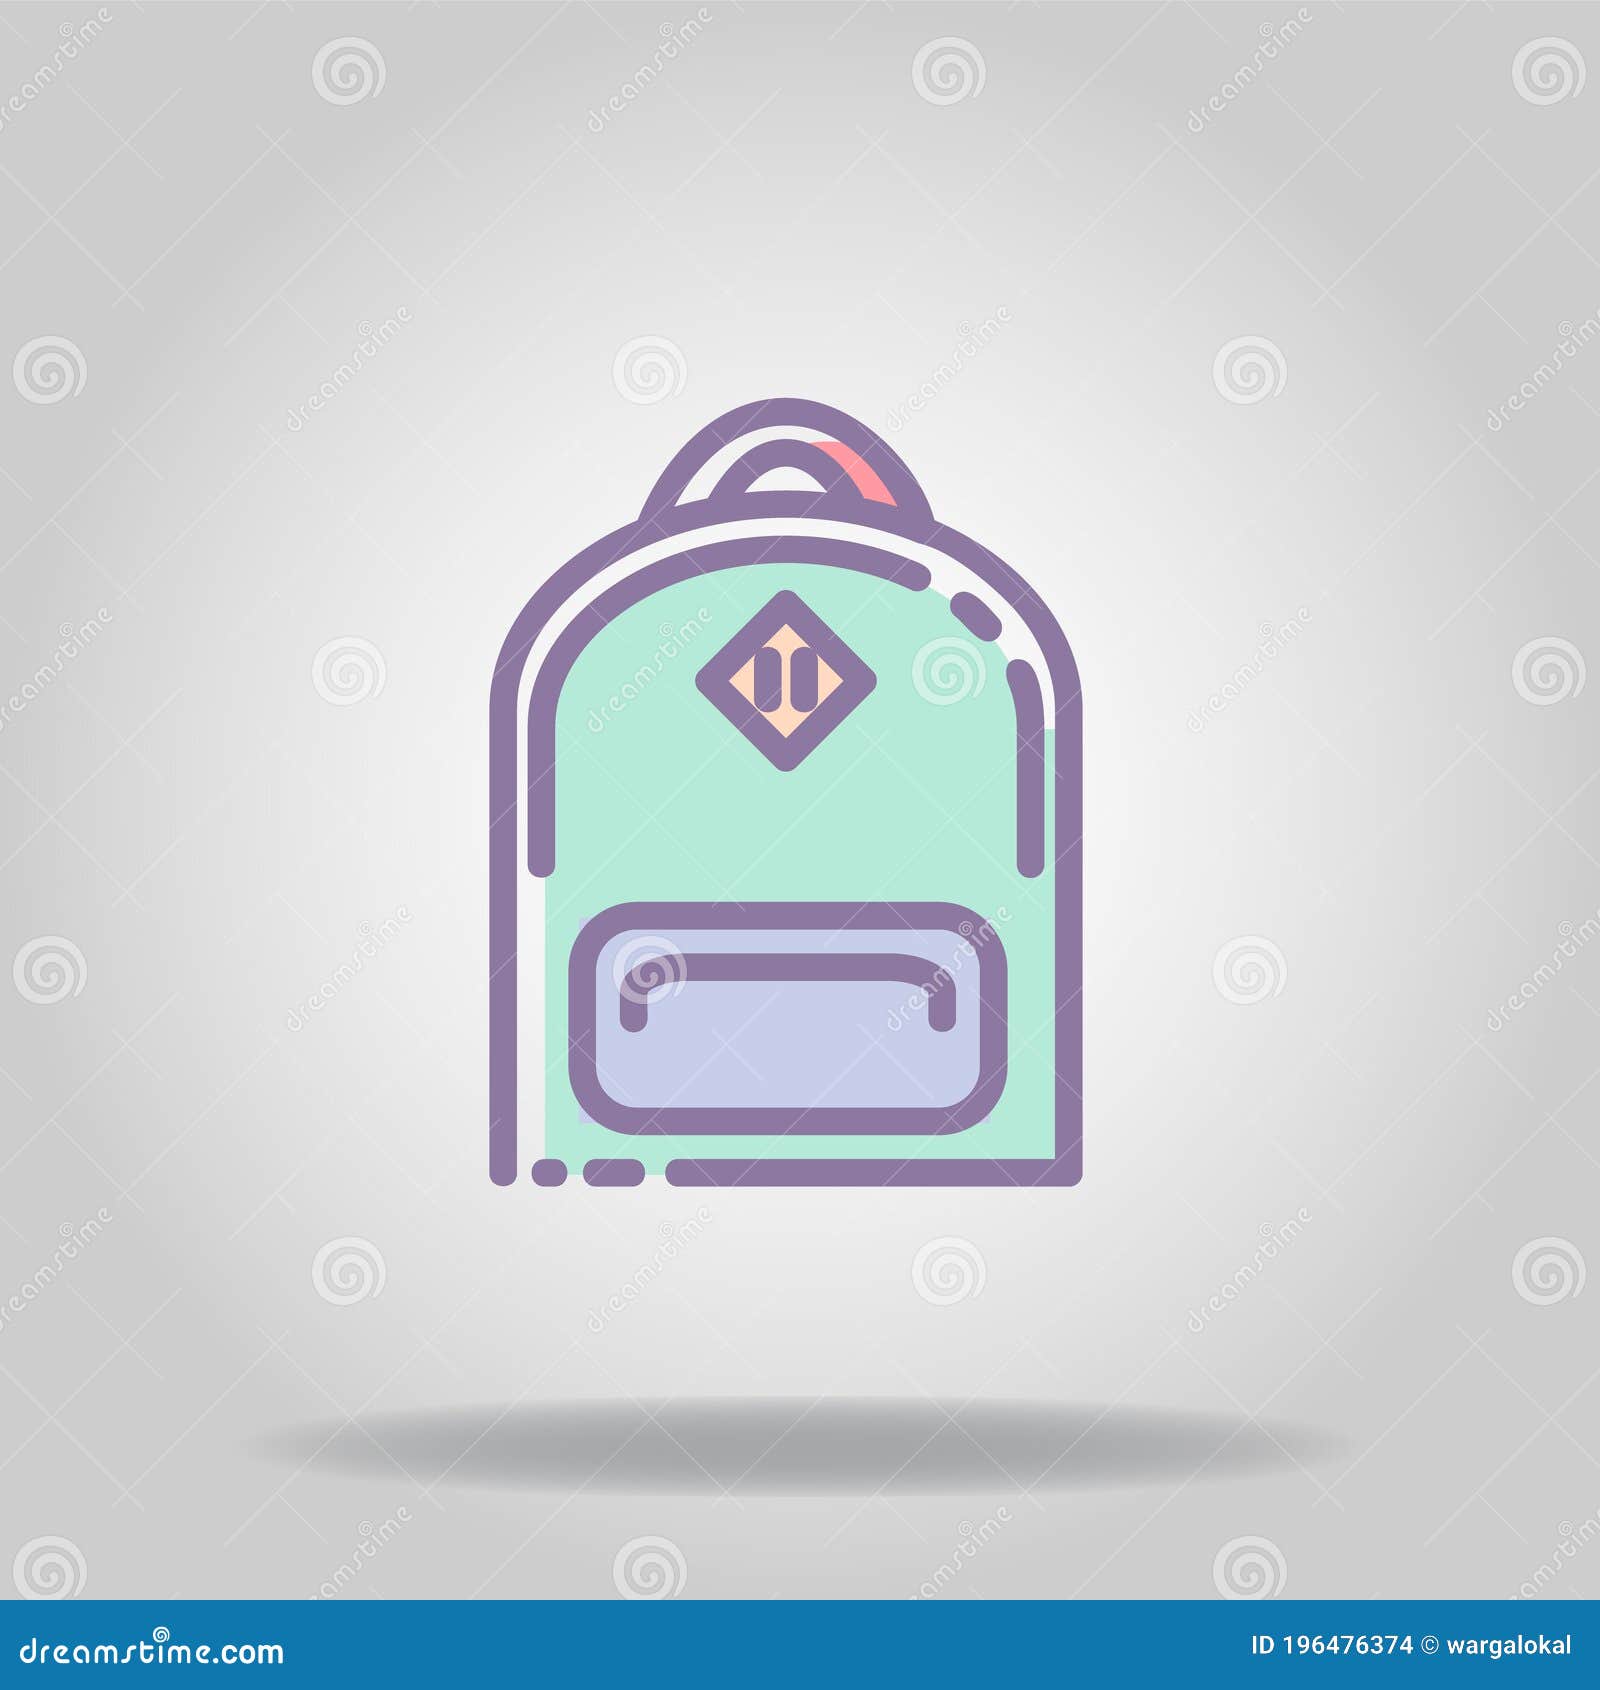 bagpack icon or logo in  pastel color